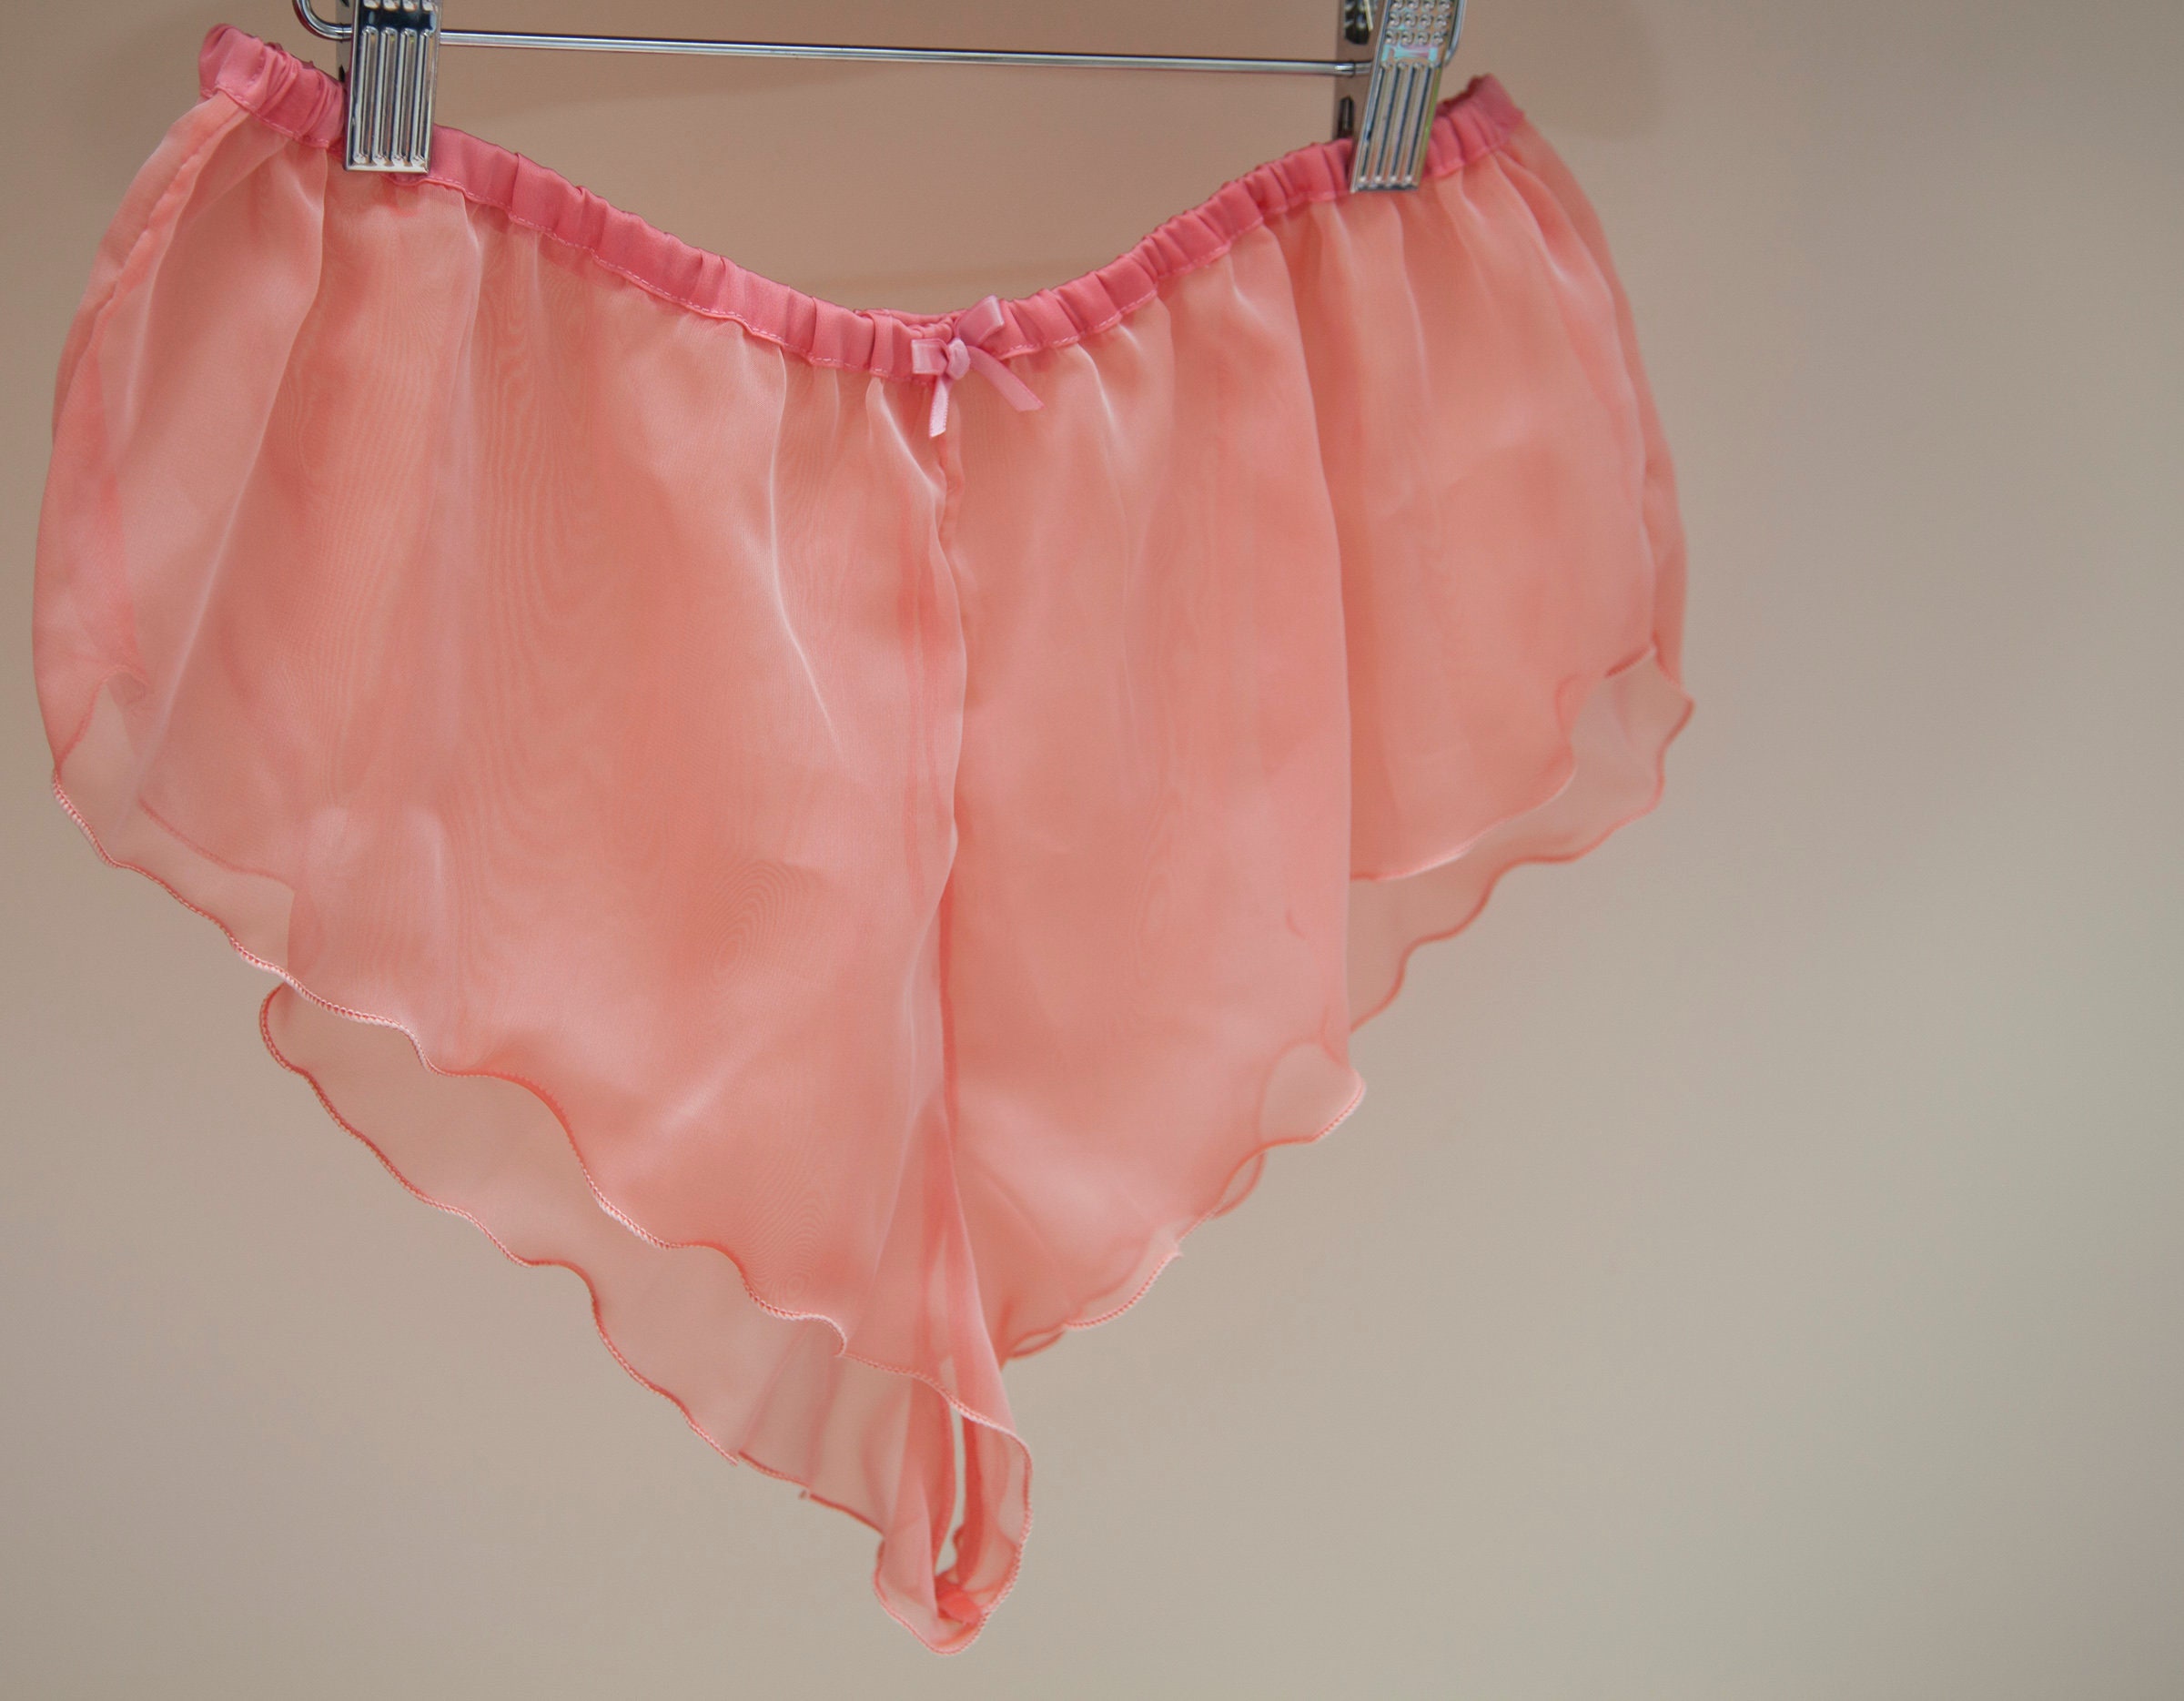 Pink Sheer Chiffon French Knickers Panties See Through Sexy Lingerie  Underwear 